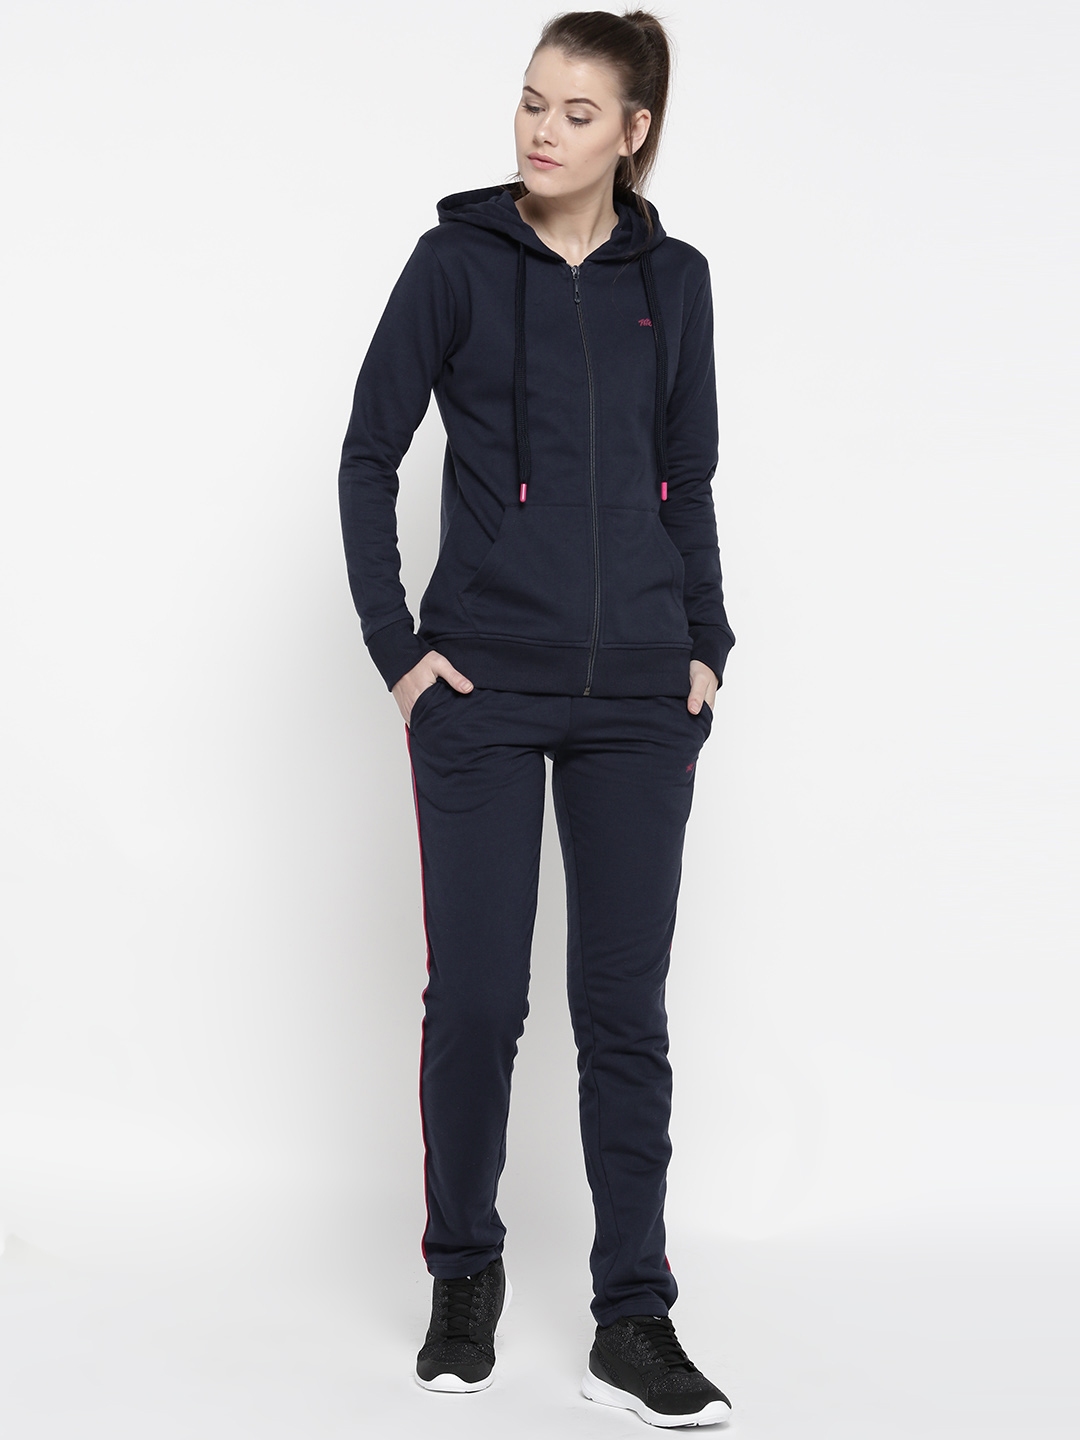 Buy Monte Carlo Navy Tracksuit - Tracksuits for Women 2325492 | Myntra